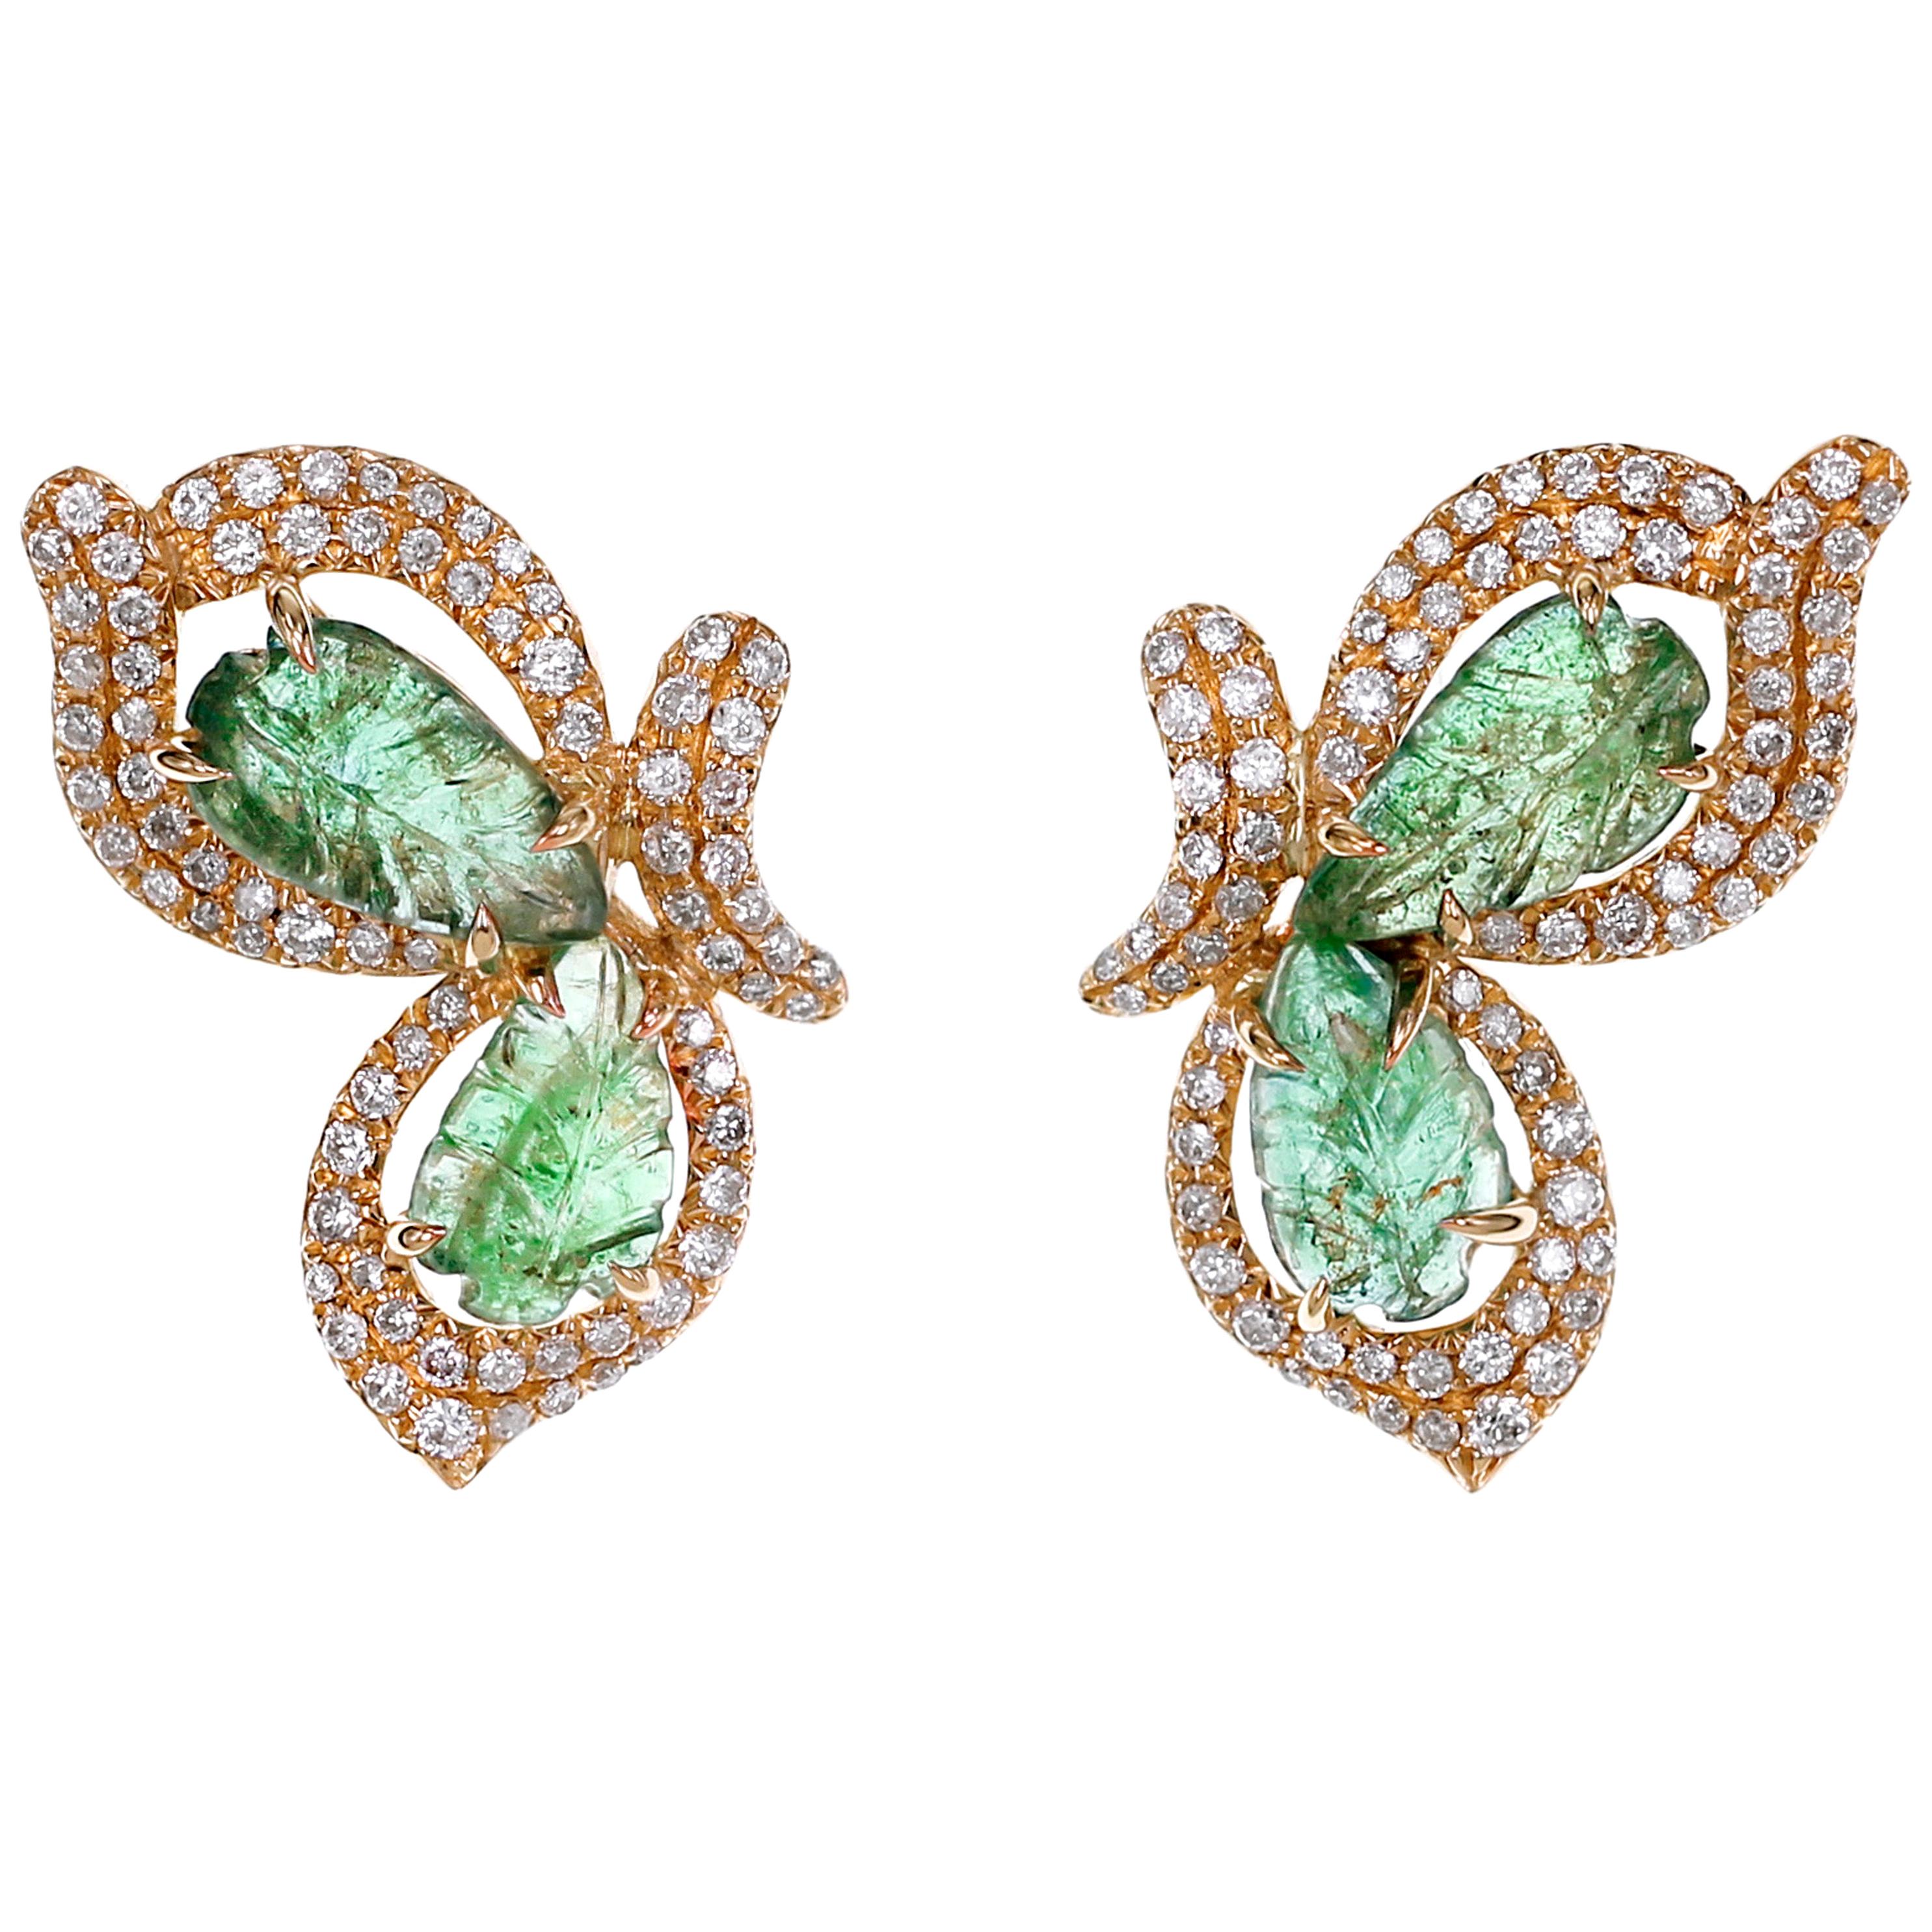 2.46 Carat Emerald Carving and Diamond Stud Earring